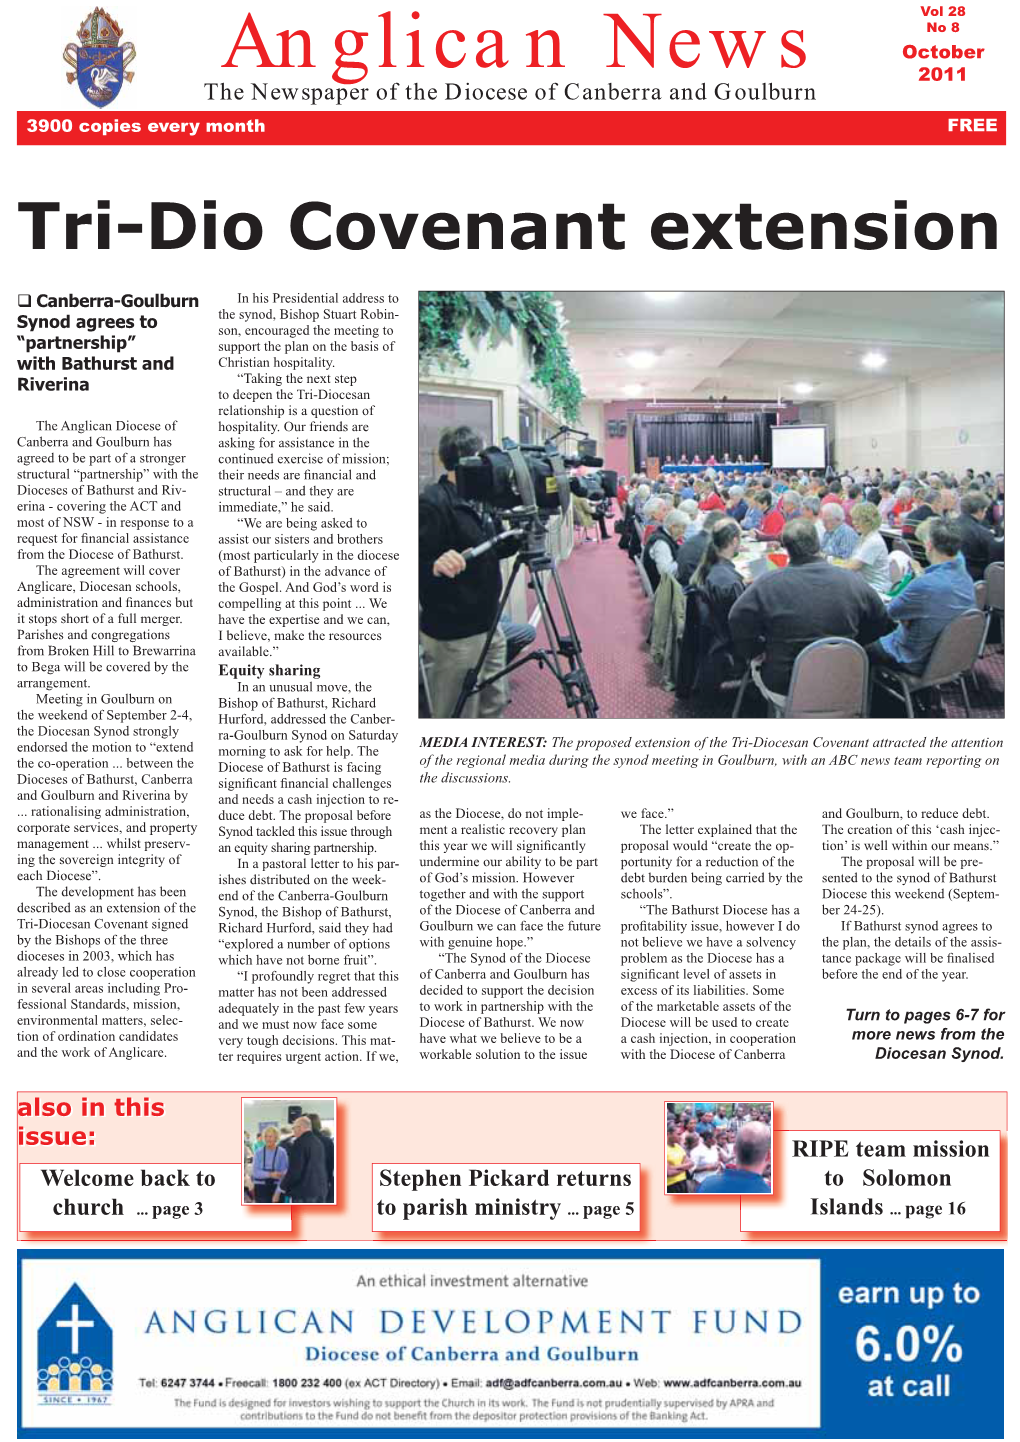 Anglican News October 2011 the Newspaper of the Diocese of Canberra and Goulburn 3900 Copies Every Month FREE Tri-Dio Covenant Extension